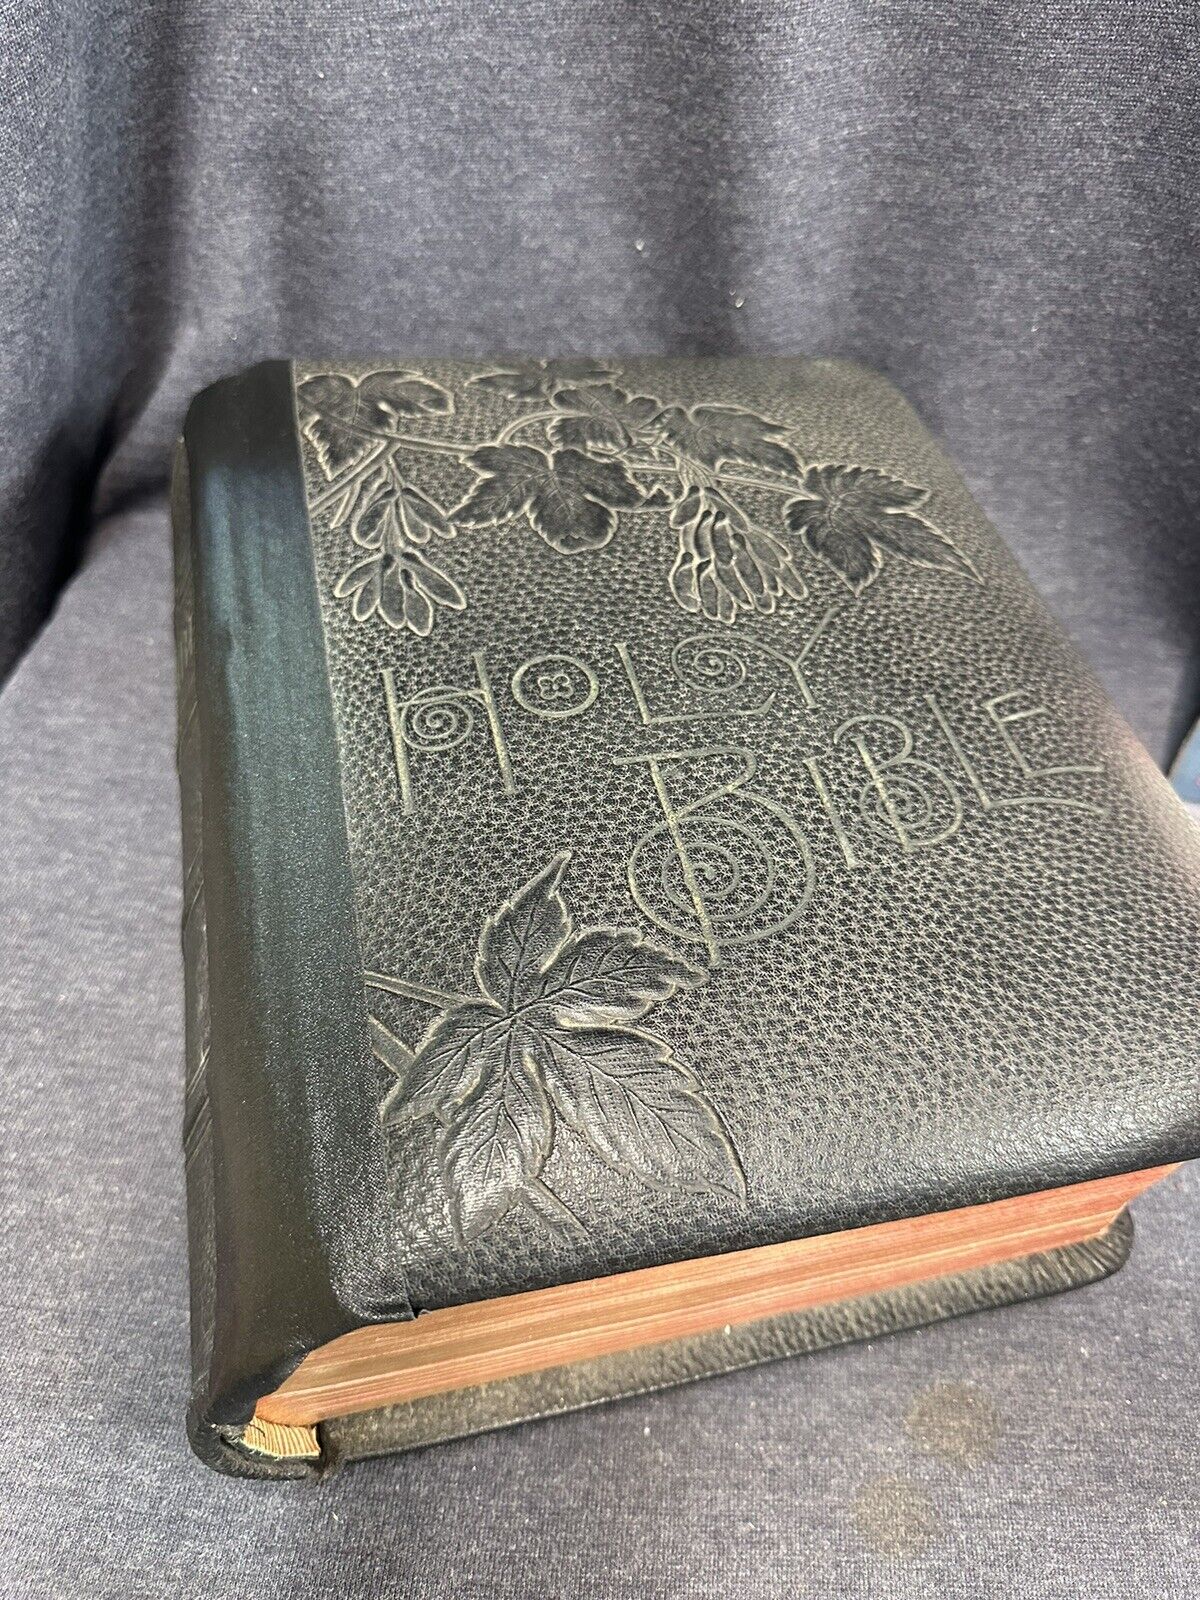 1891 Holman Self Explanatory Pictorial Holy Bible W/ Illustrations